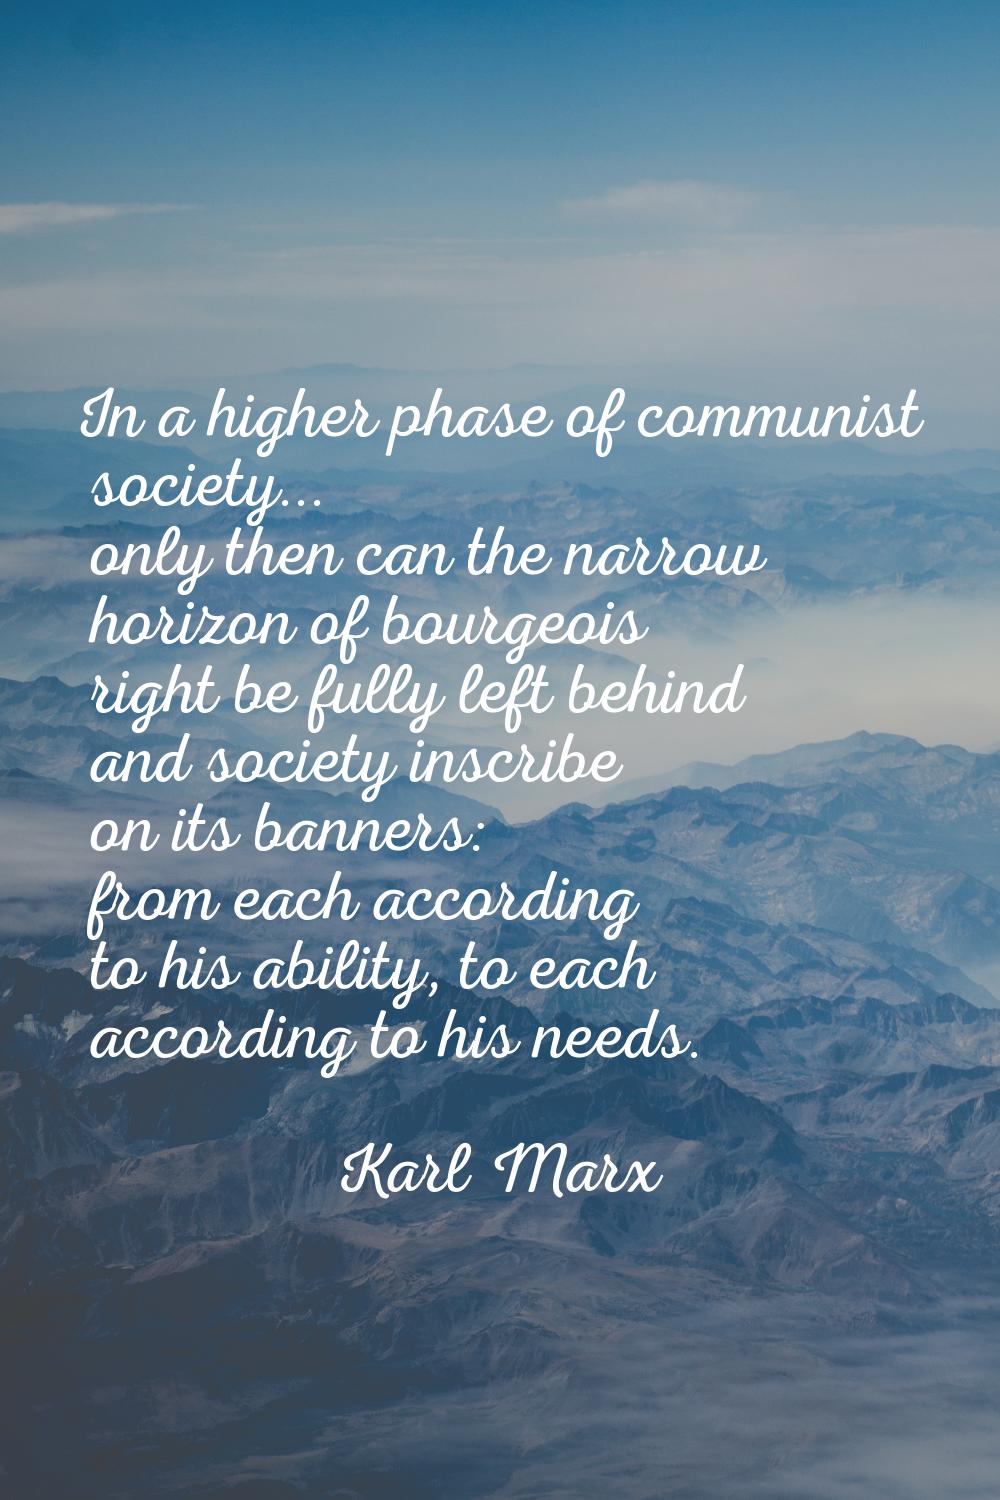 In a higher phase of communist society... only then can the narrow horizon of bourgeois right be fu